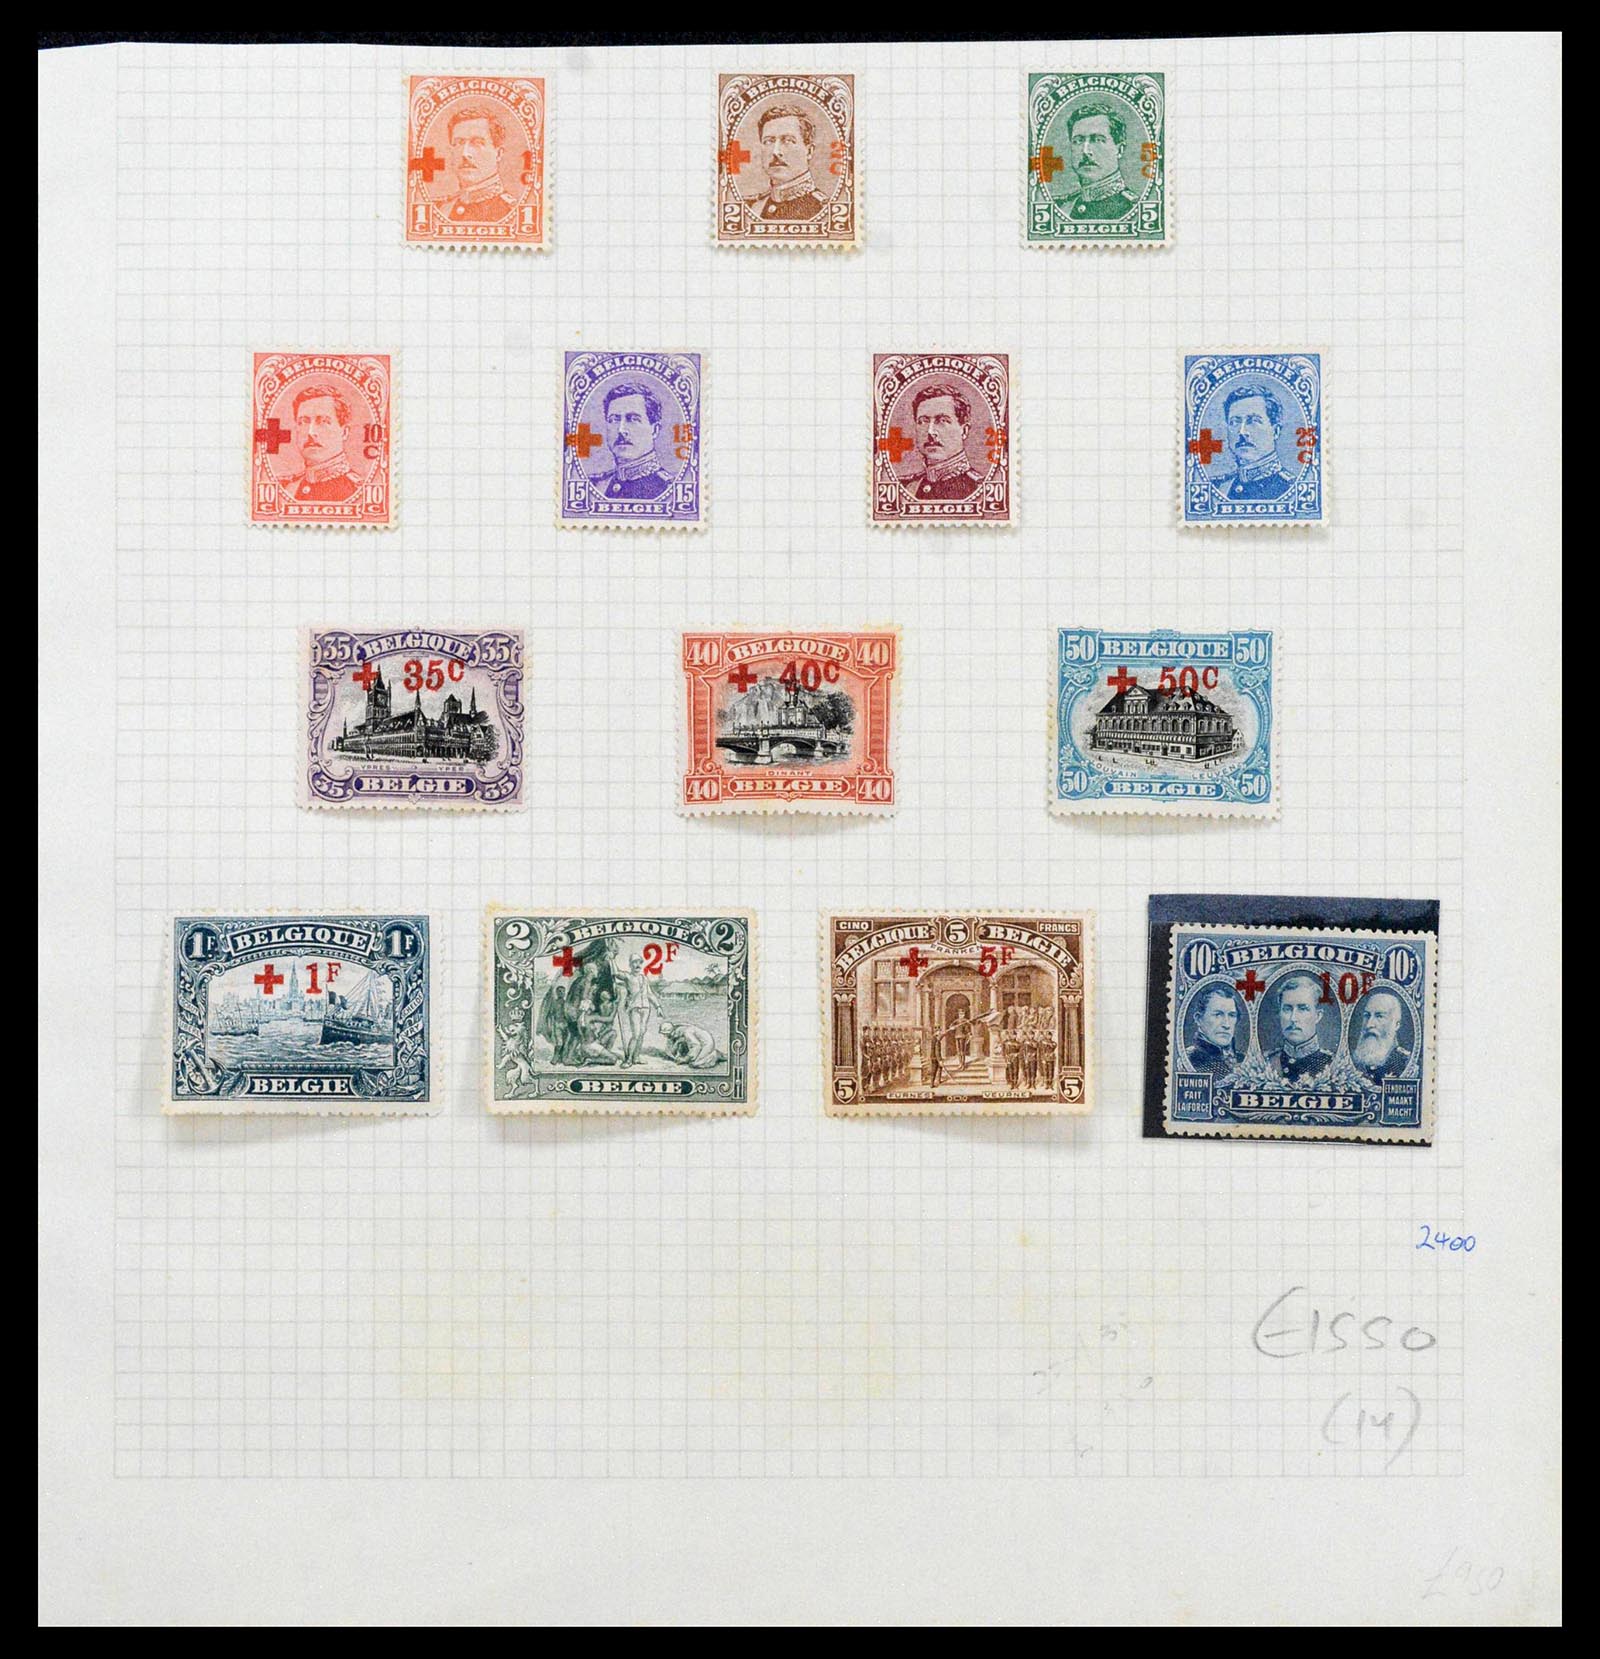 39350 0003 - Stamp collection 39350 Belgium investment lot key stamps 1866-1933.